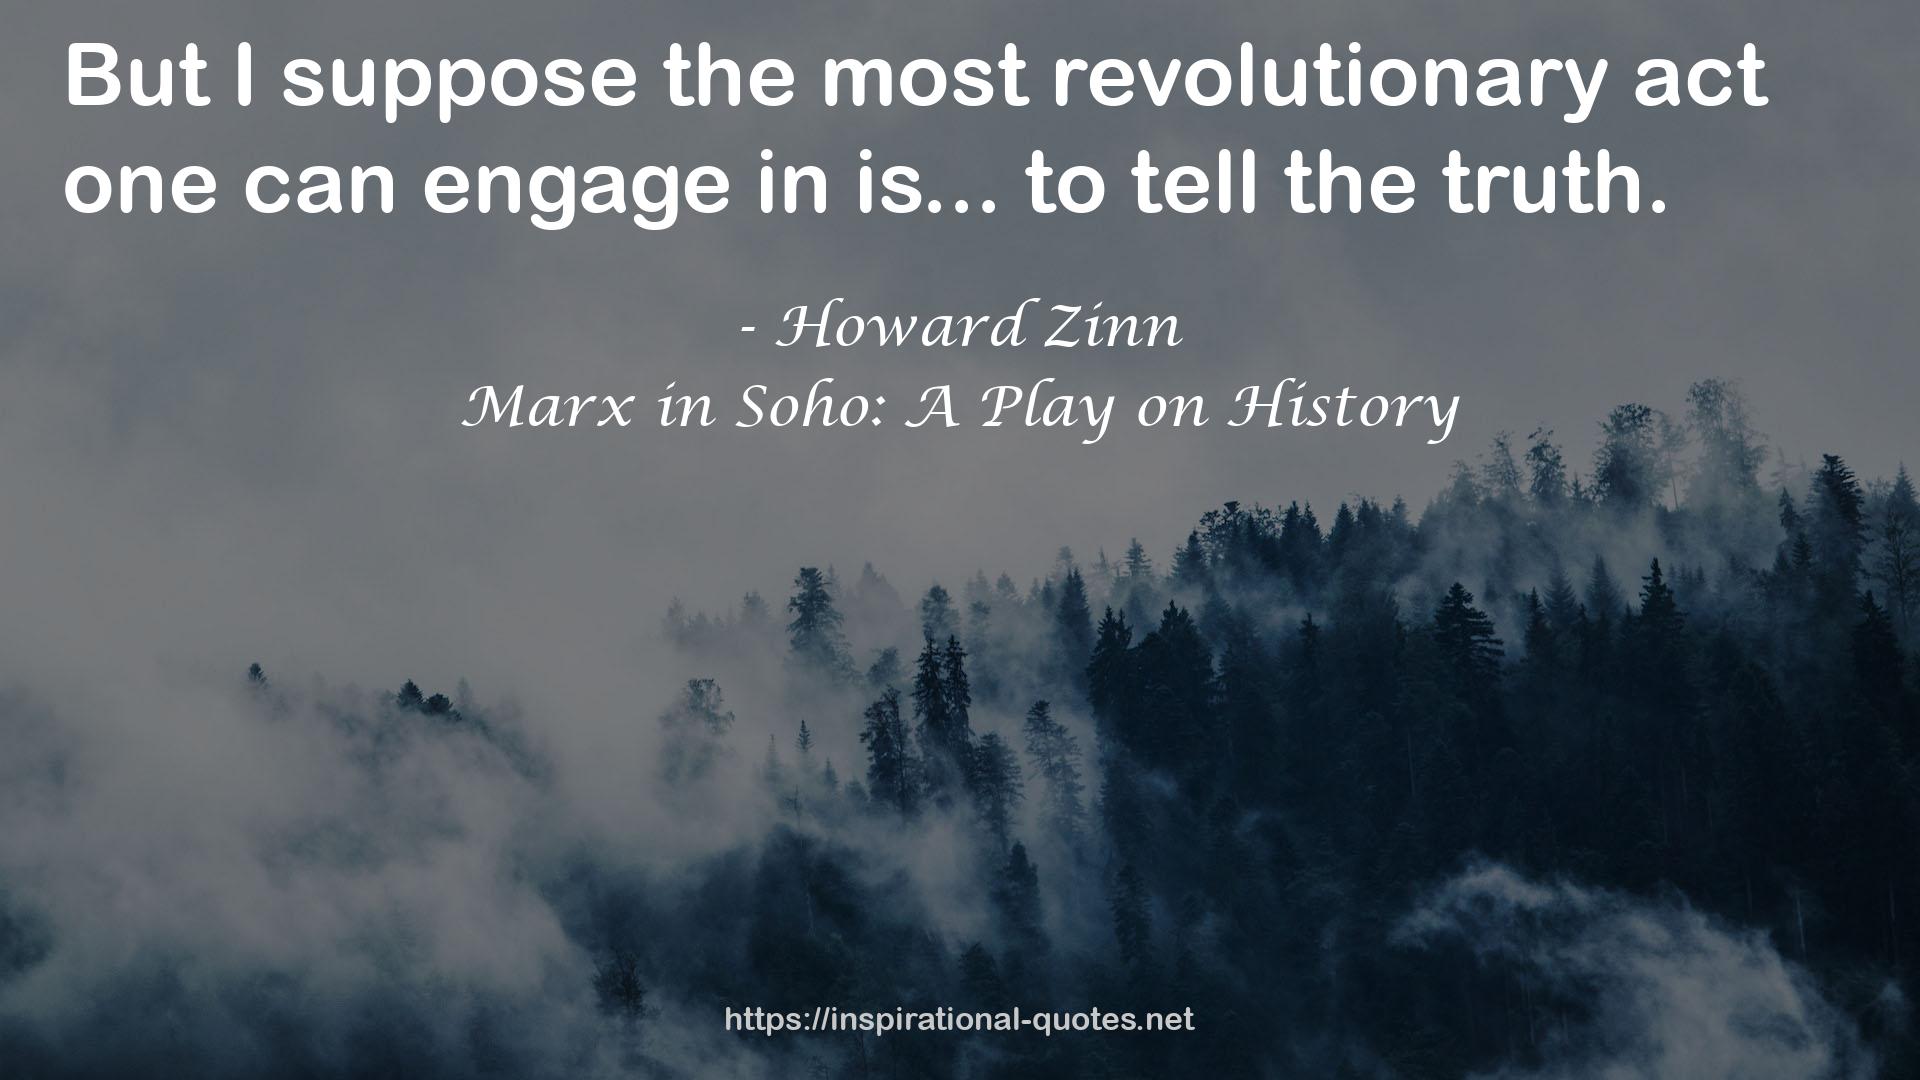 Marx in Soho: A Play on History QUOTES